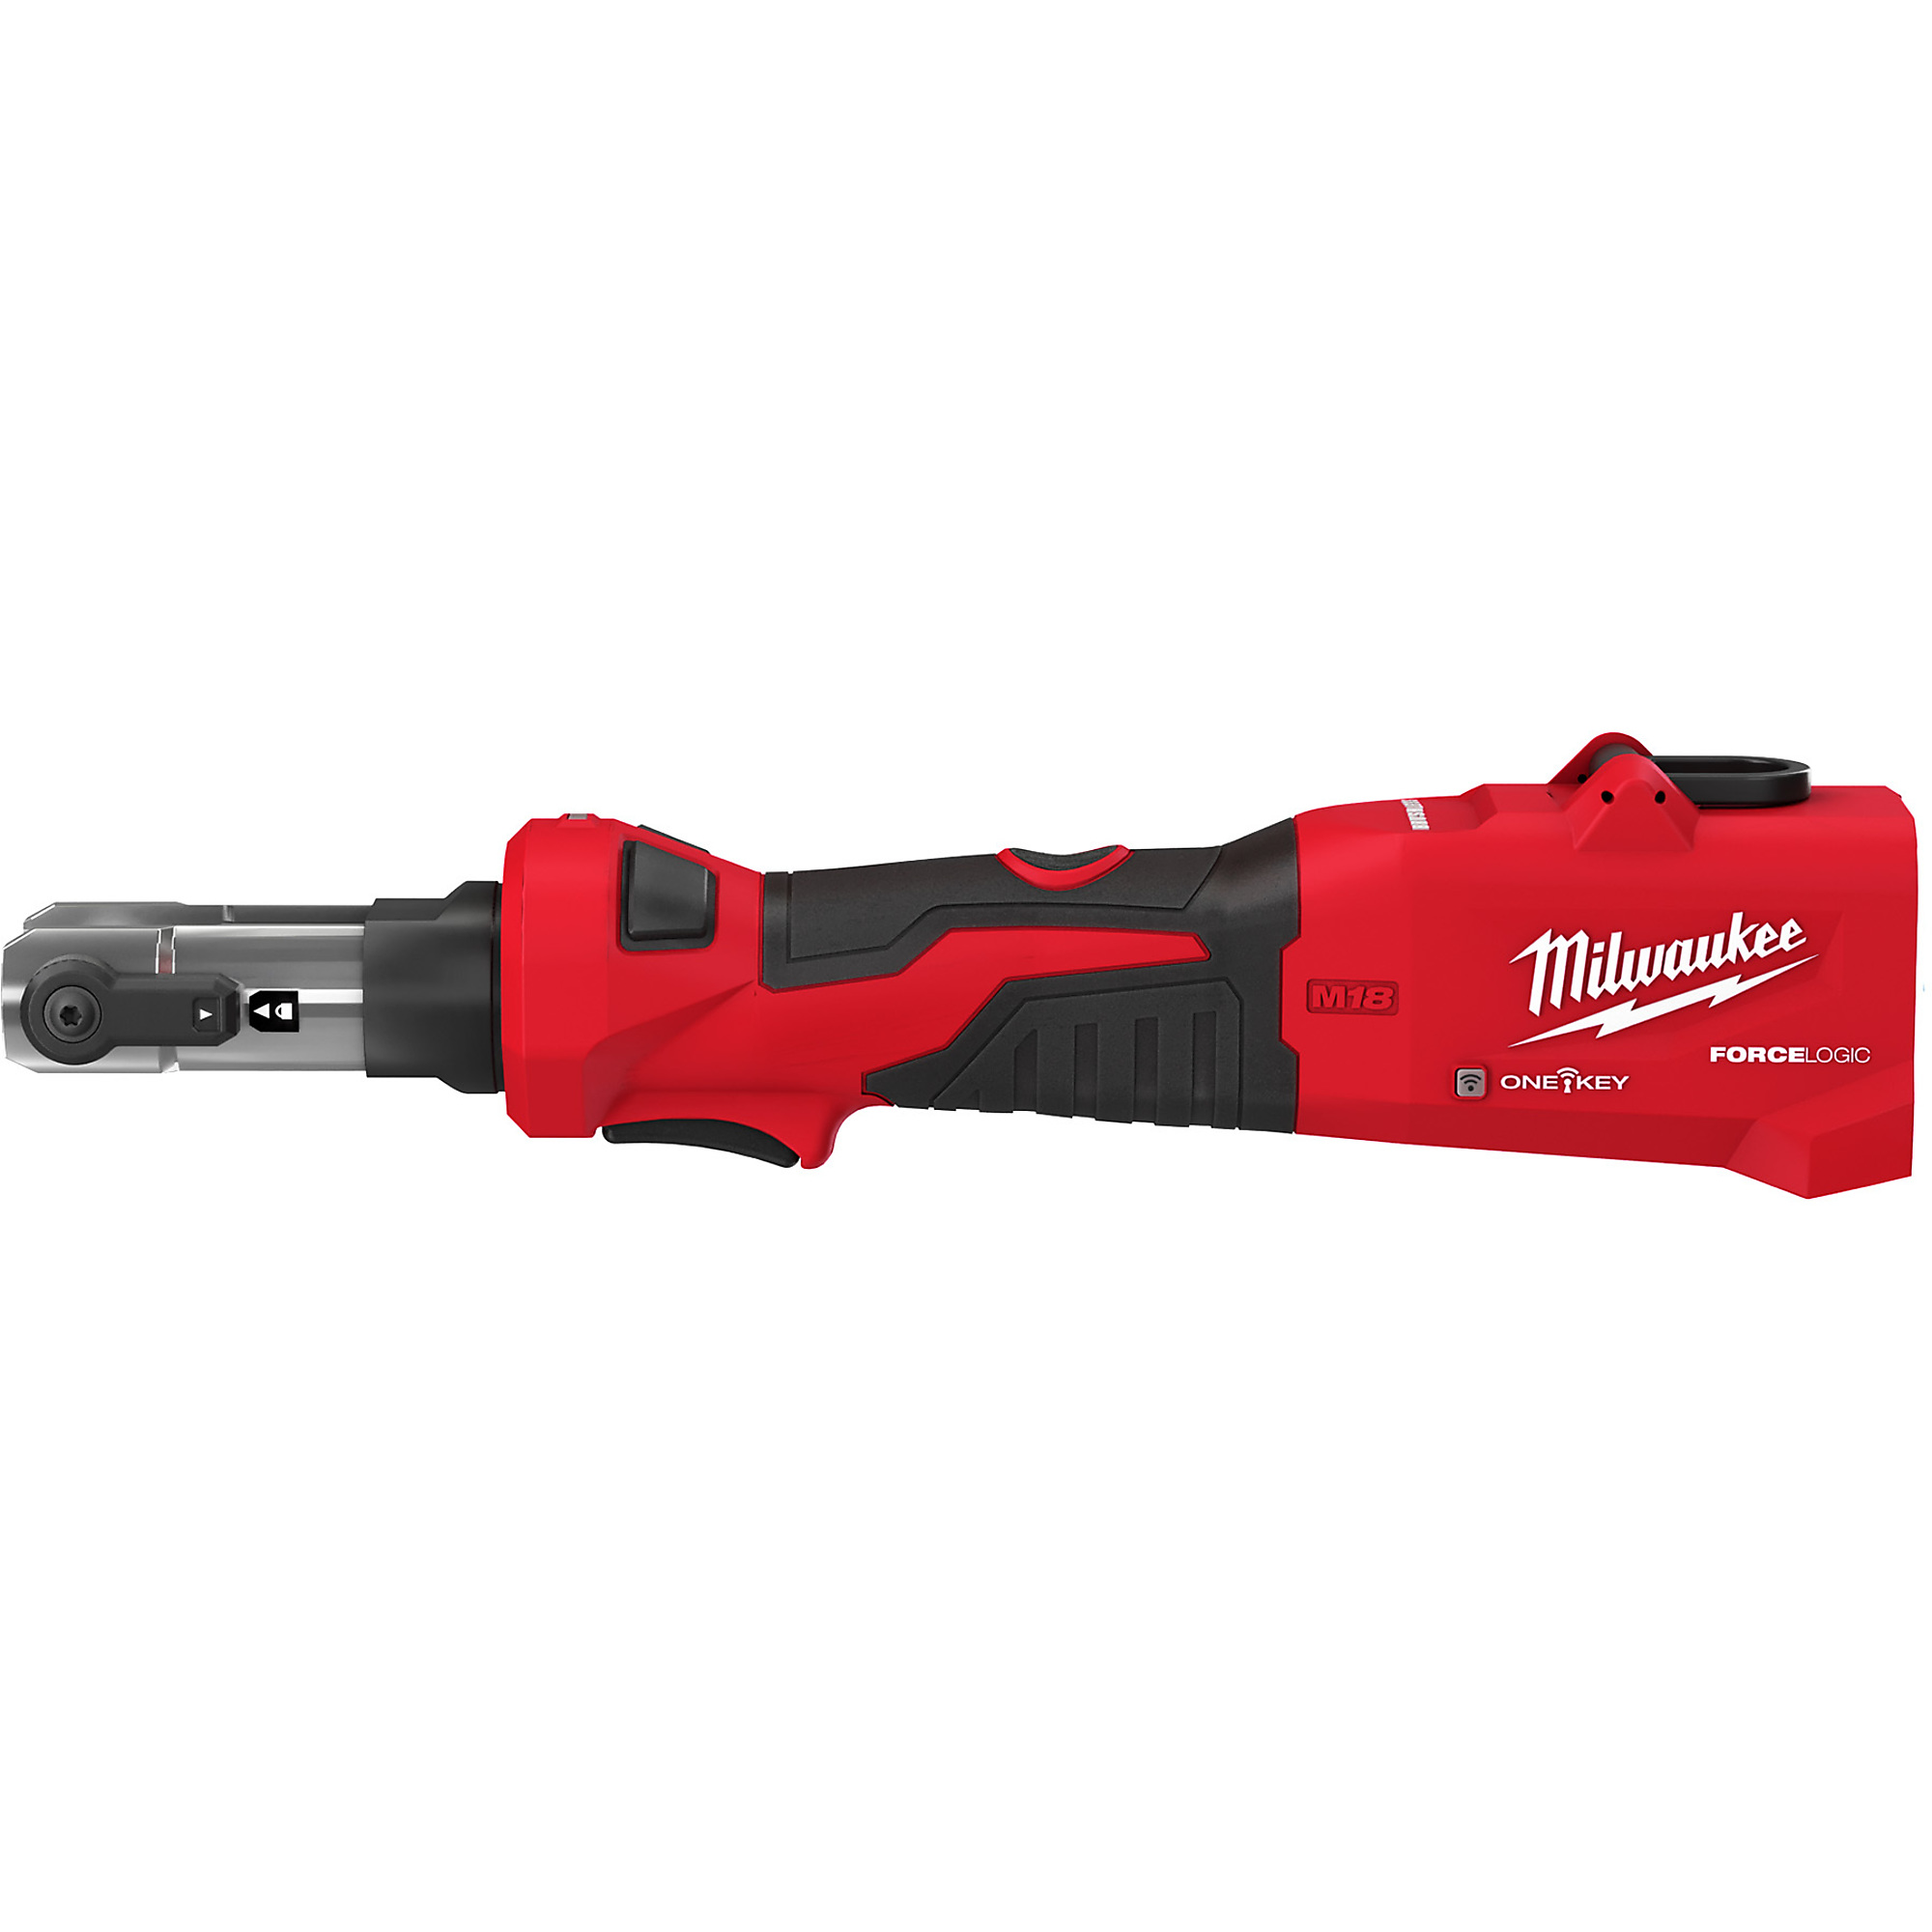 Milwaukee M18 FORCE LOGIC , M18 FORCE LOGIC 6T Linear Utility Crimper, Chuck Size Multiple in, Tools Included (qty.) 1, Model 2978-20